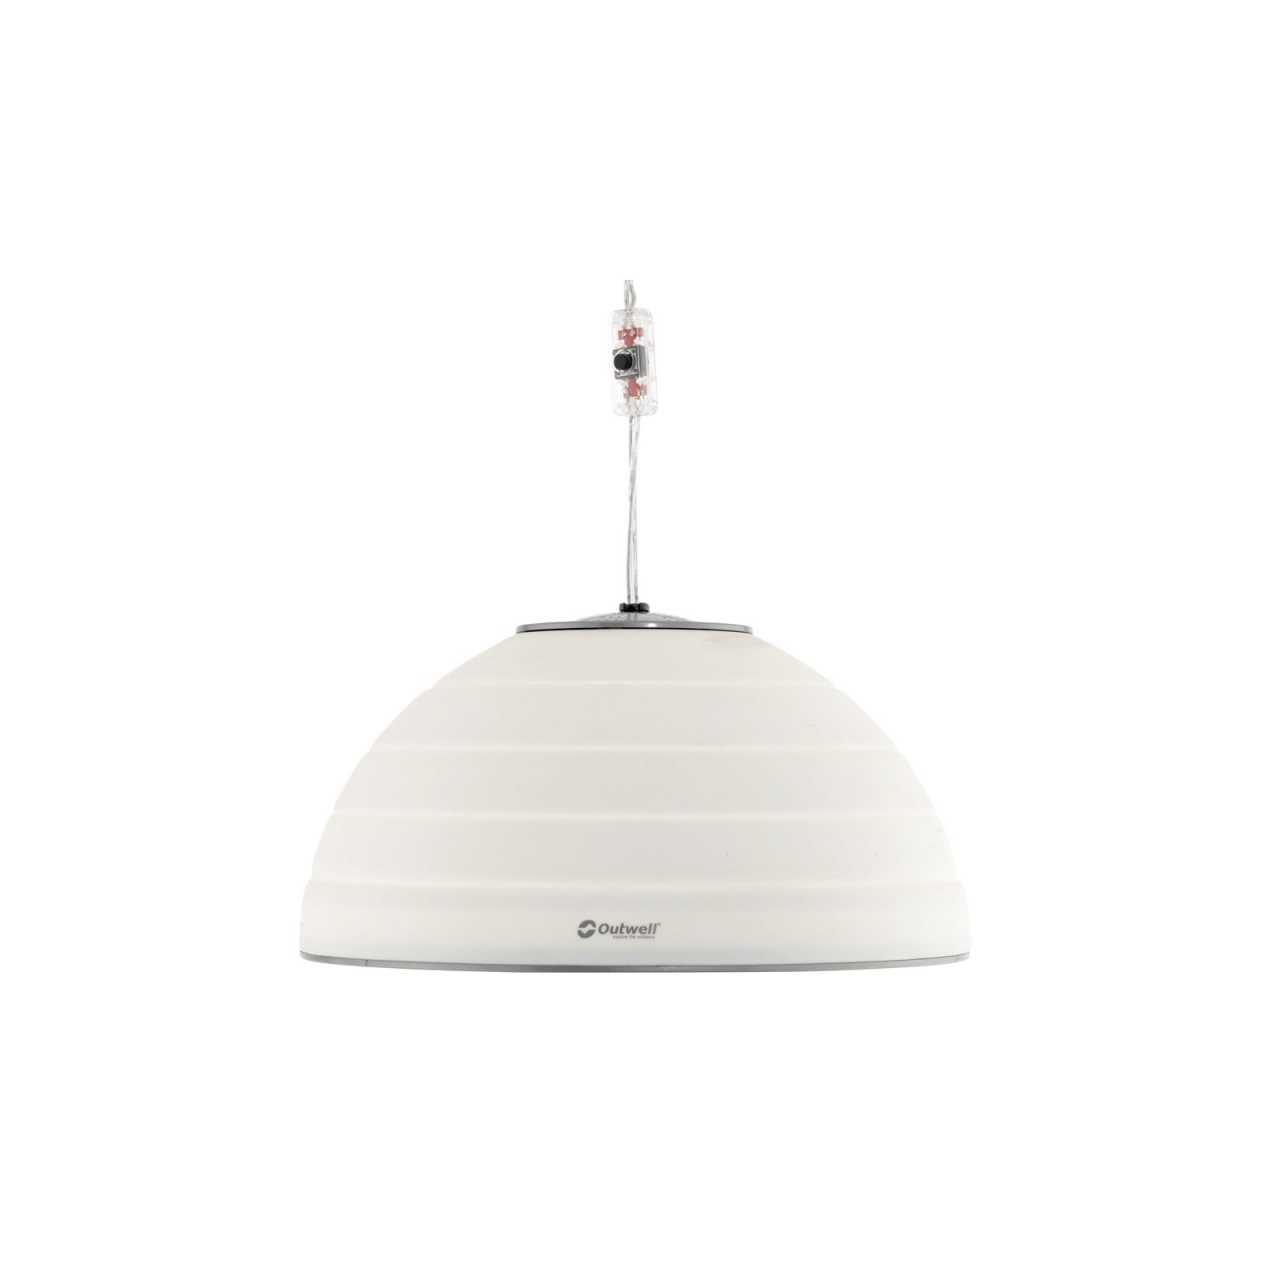 Outwell Zeltlampe Lampe Pollux Lux Cream White 650873